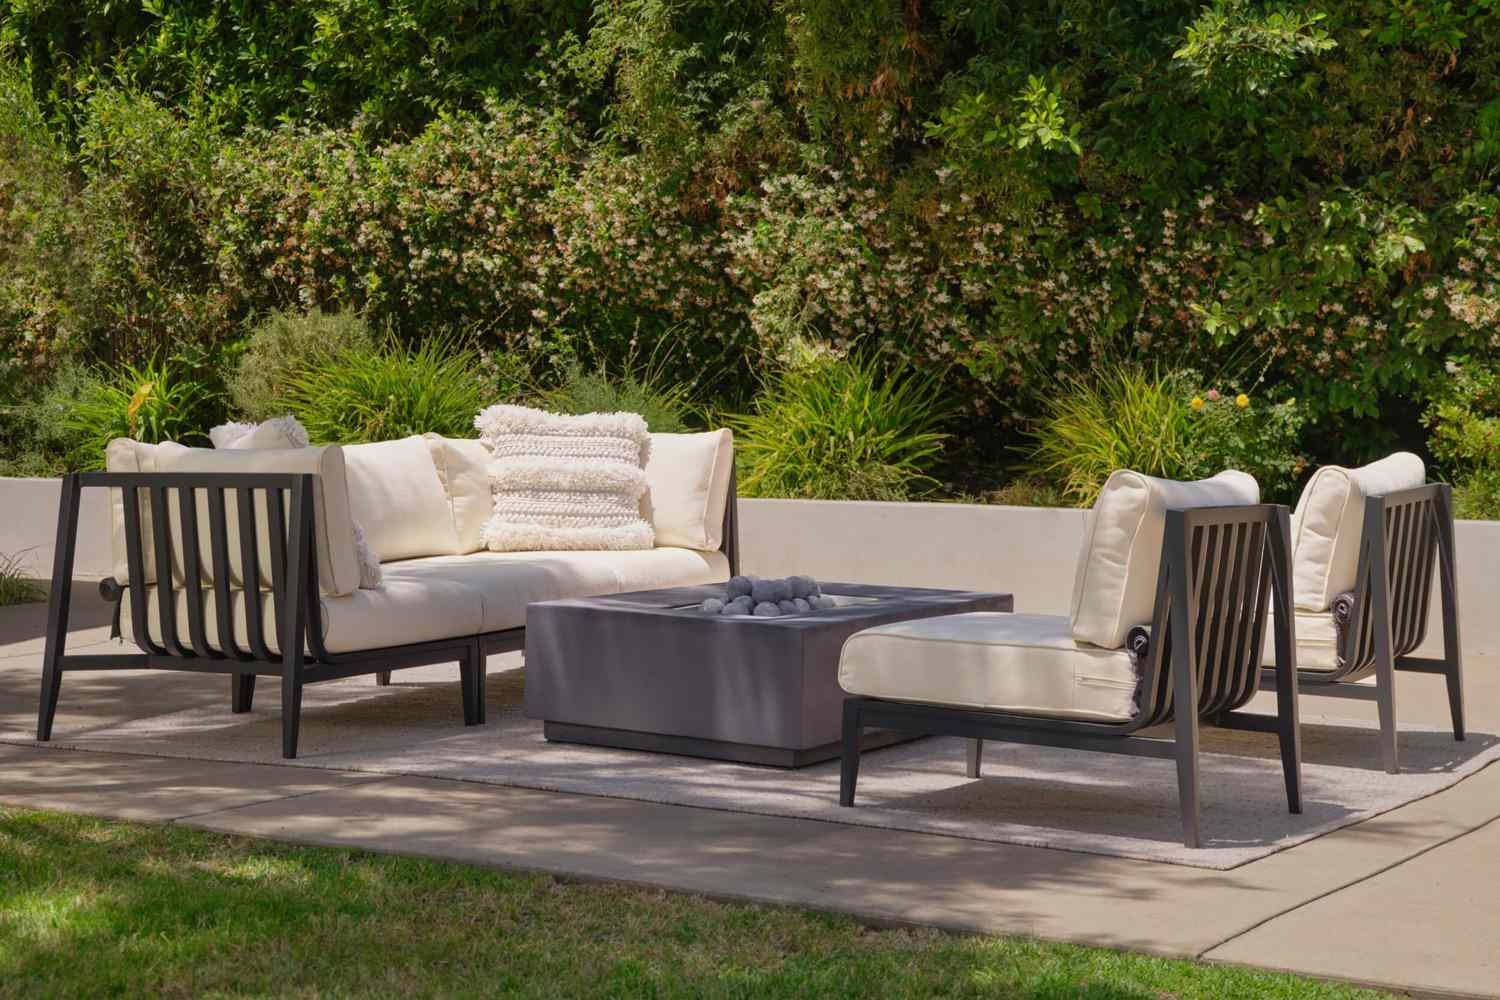 Elevate Your Space with Stylish Garden Furniture: Ideas and Inspiration